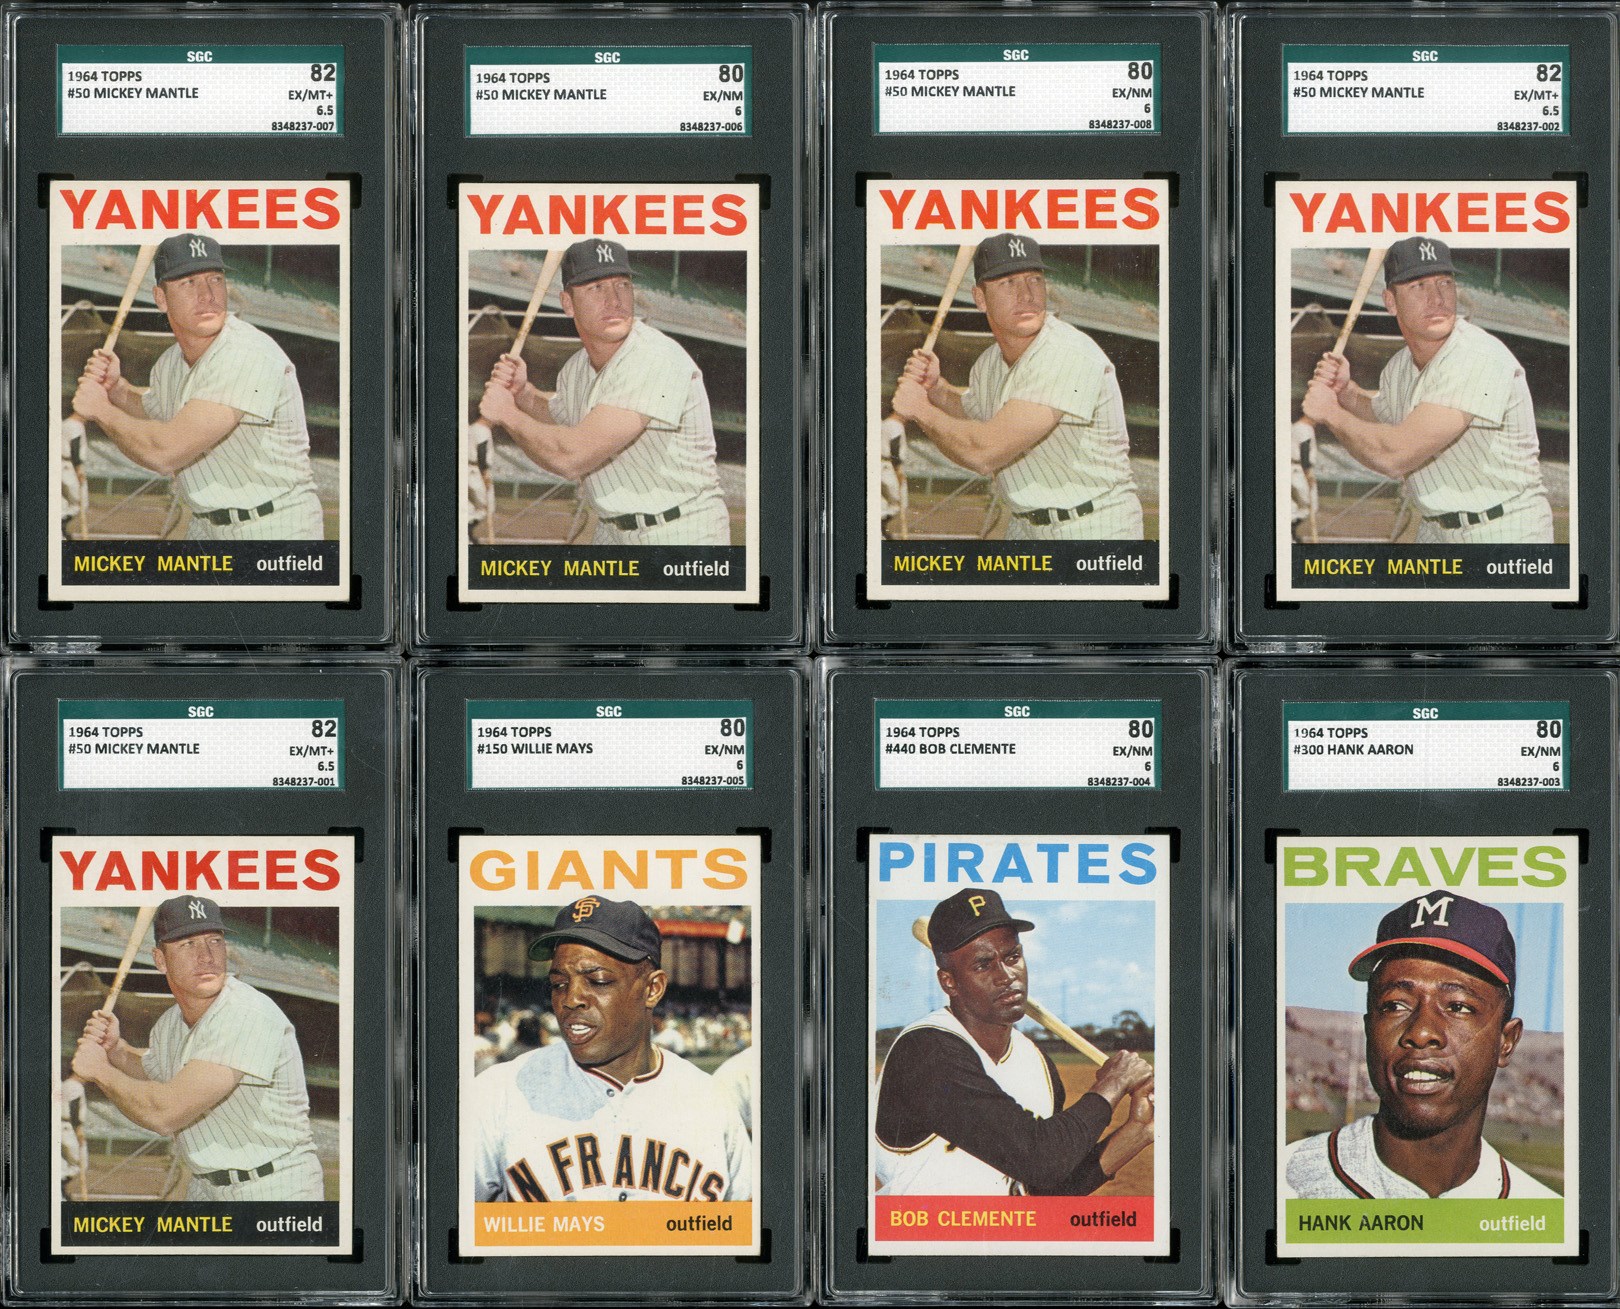 Baseball and Trading Cards - 1964 Topps High Grade Lot of 500+ cards Loaded with Stars (8 SGC Graded)